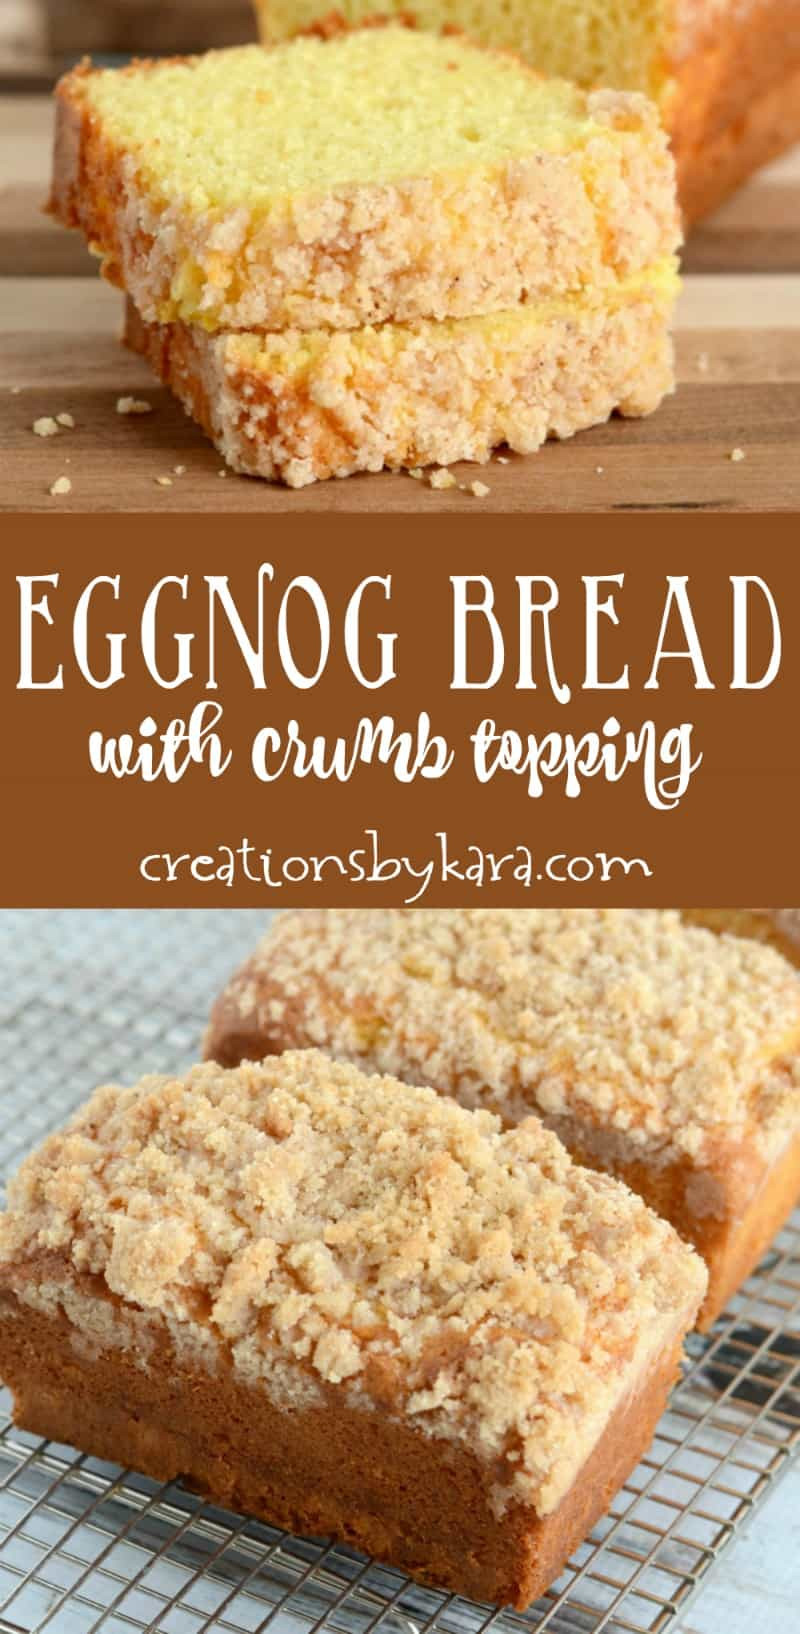 Christmas Quick Bread Recipes
 Eggnog Quick Bread with Crumb Topping Creations by Kara